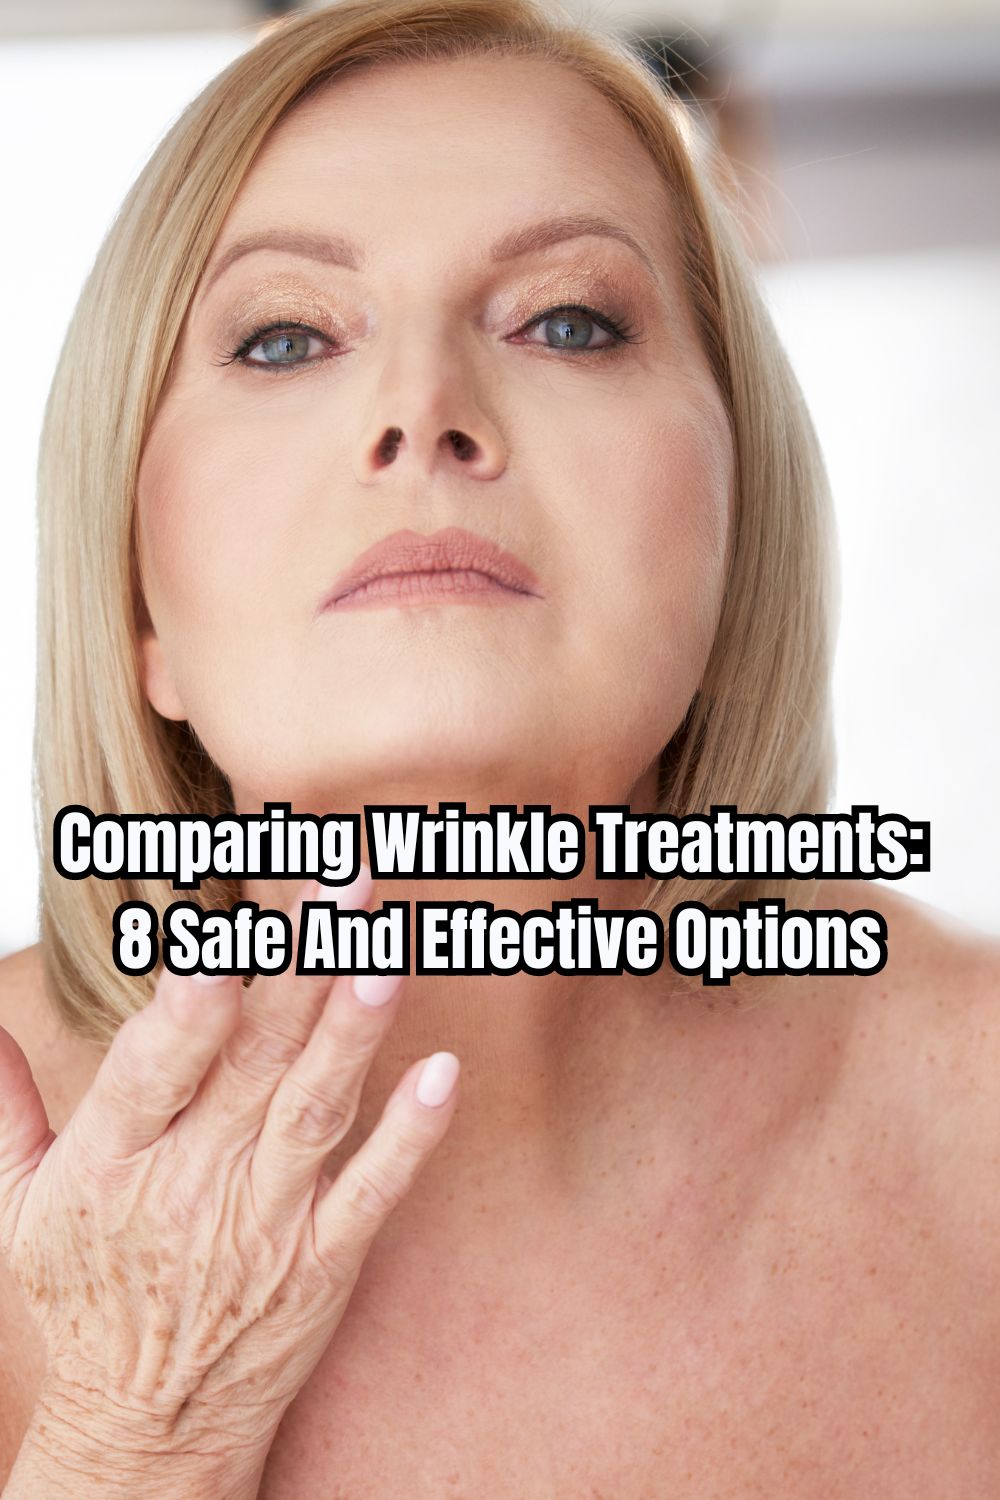 Comparing Wrinkle Treatments 8 Safe And Effective Options (1)